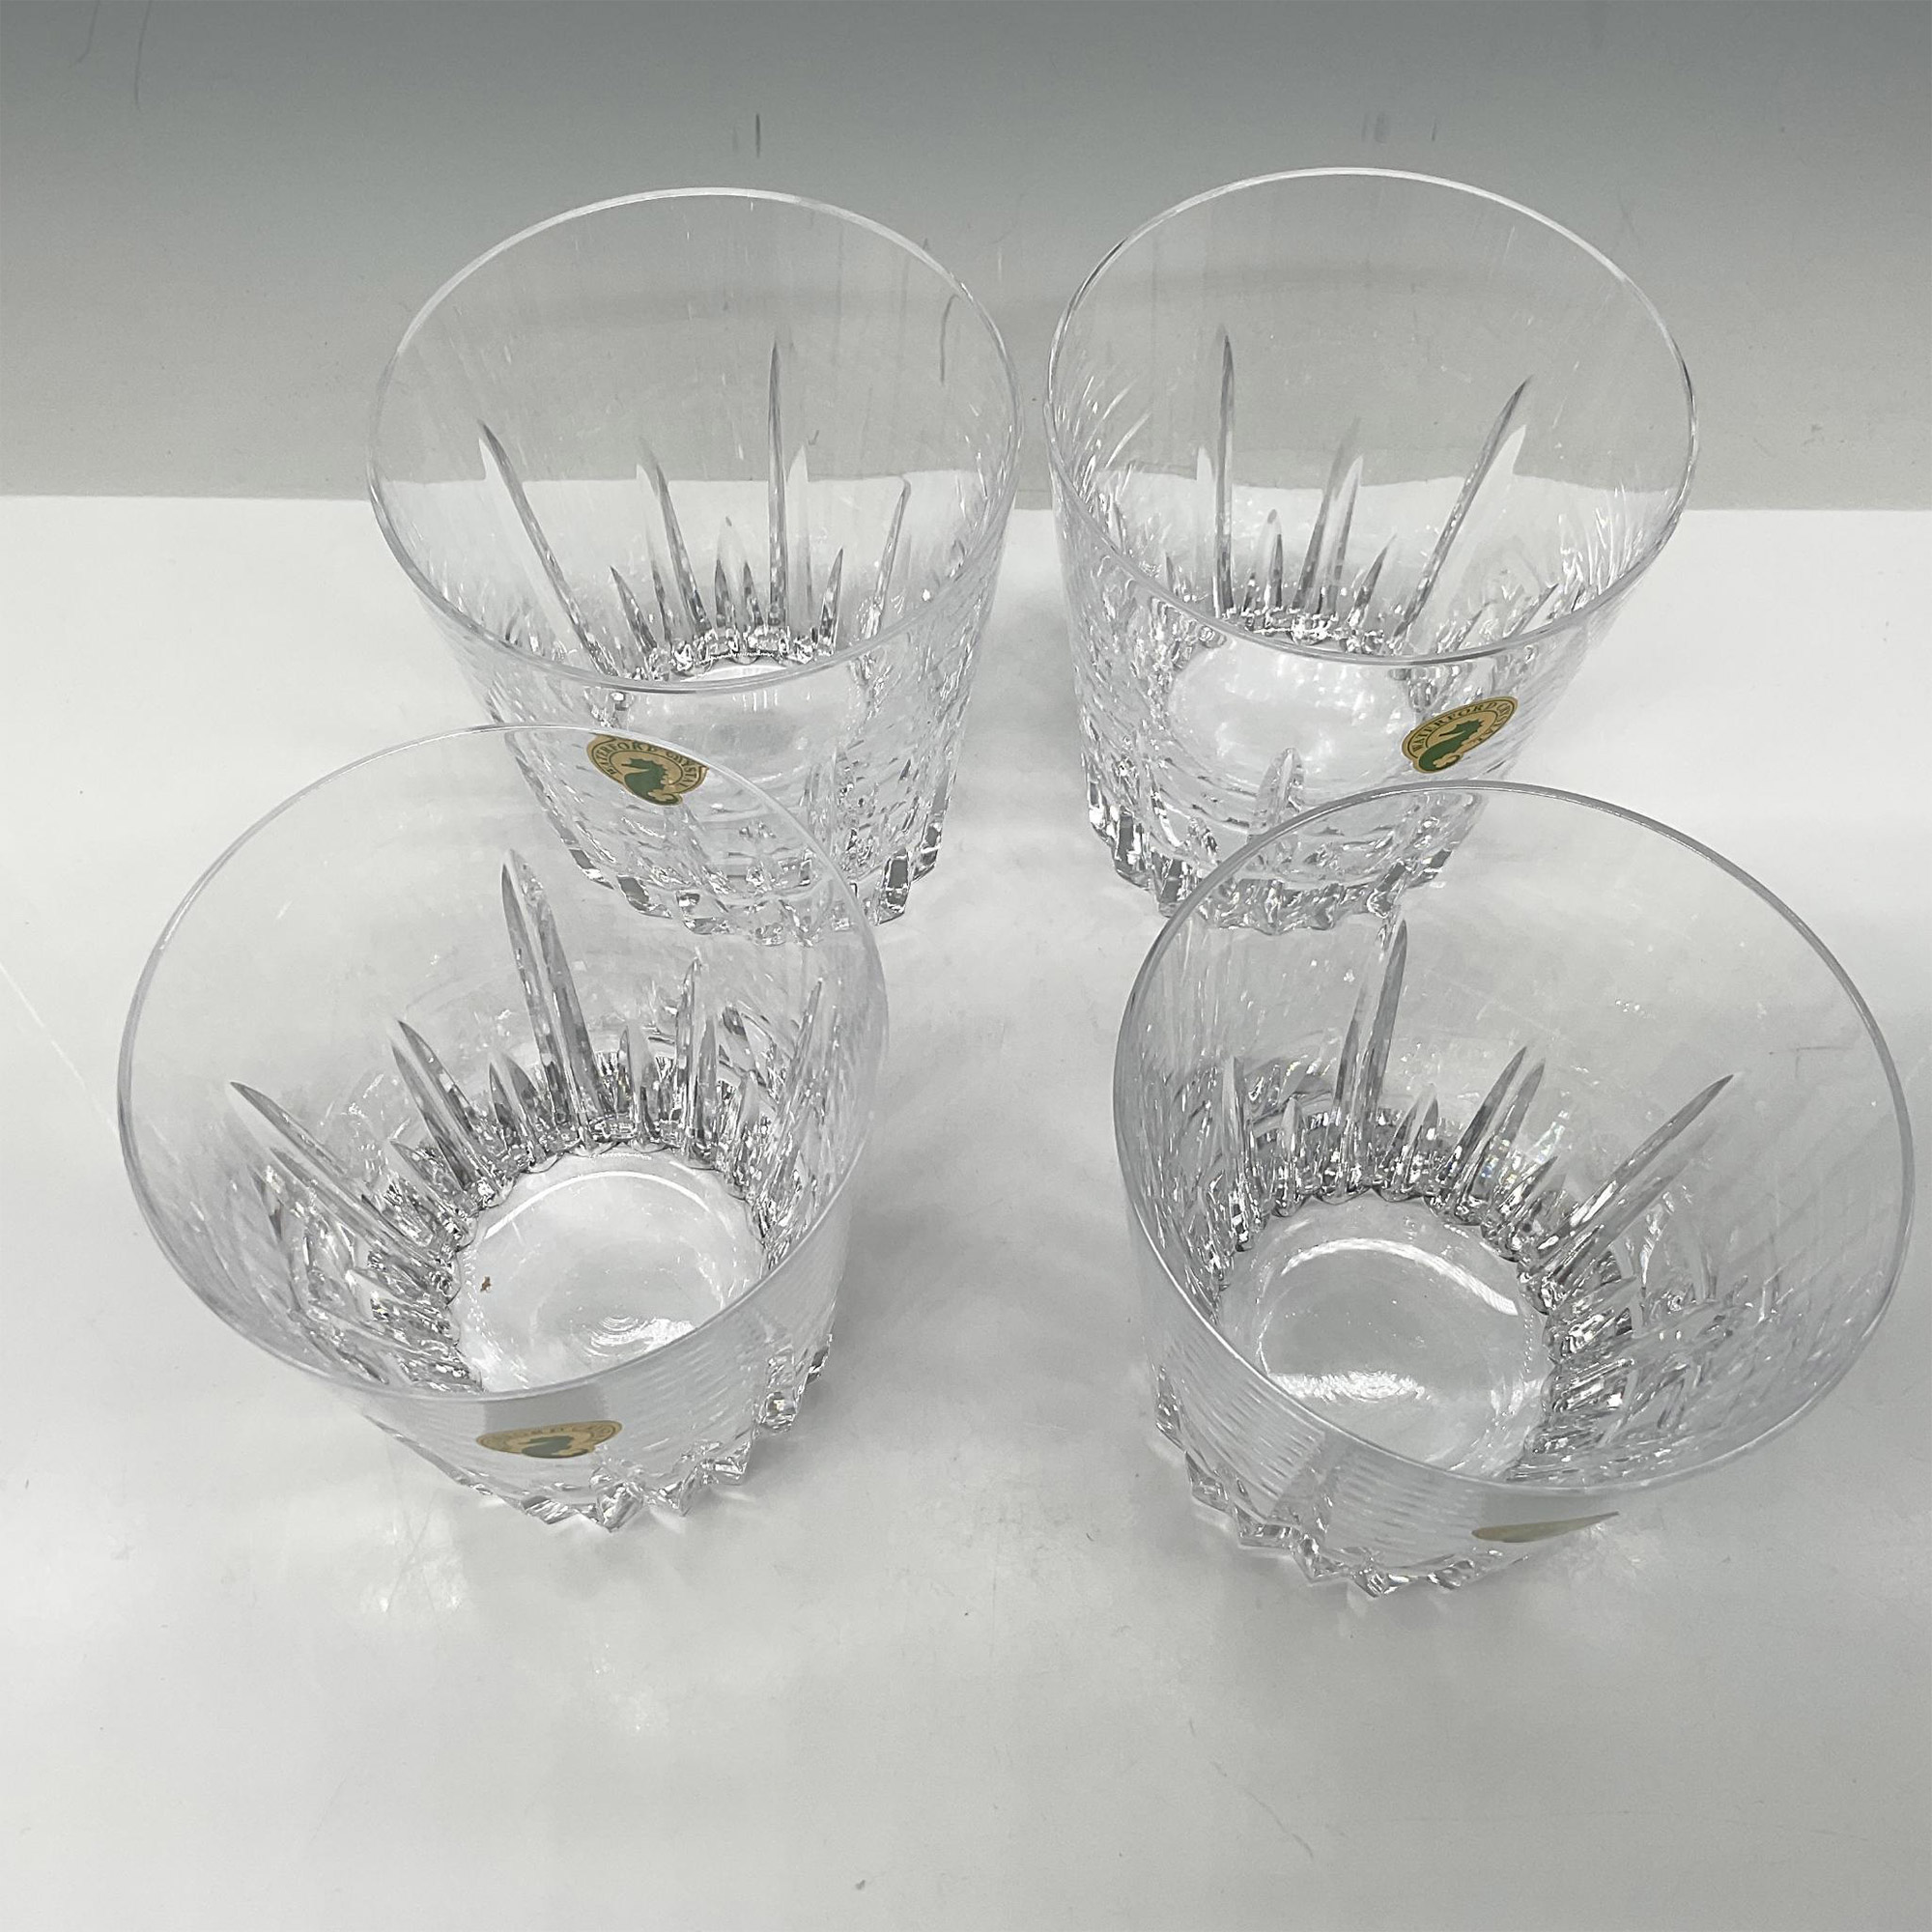 Waterford Crystal Tumblers, Southbridge Set of 4 - Image 2 of 4